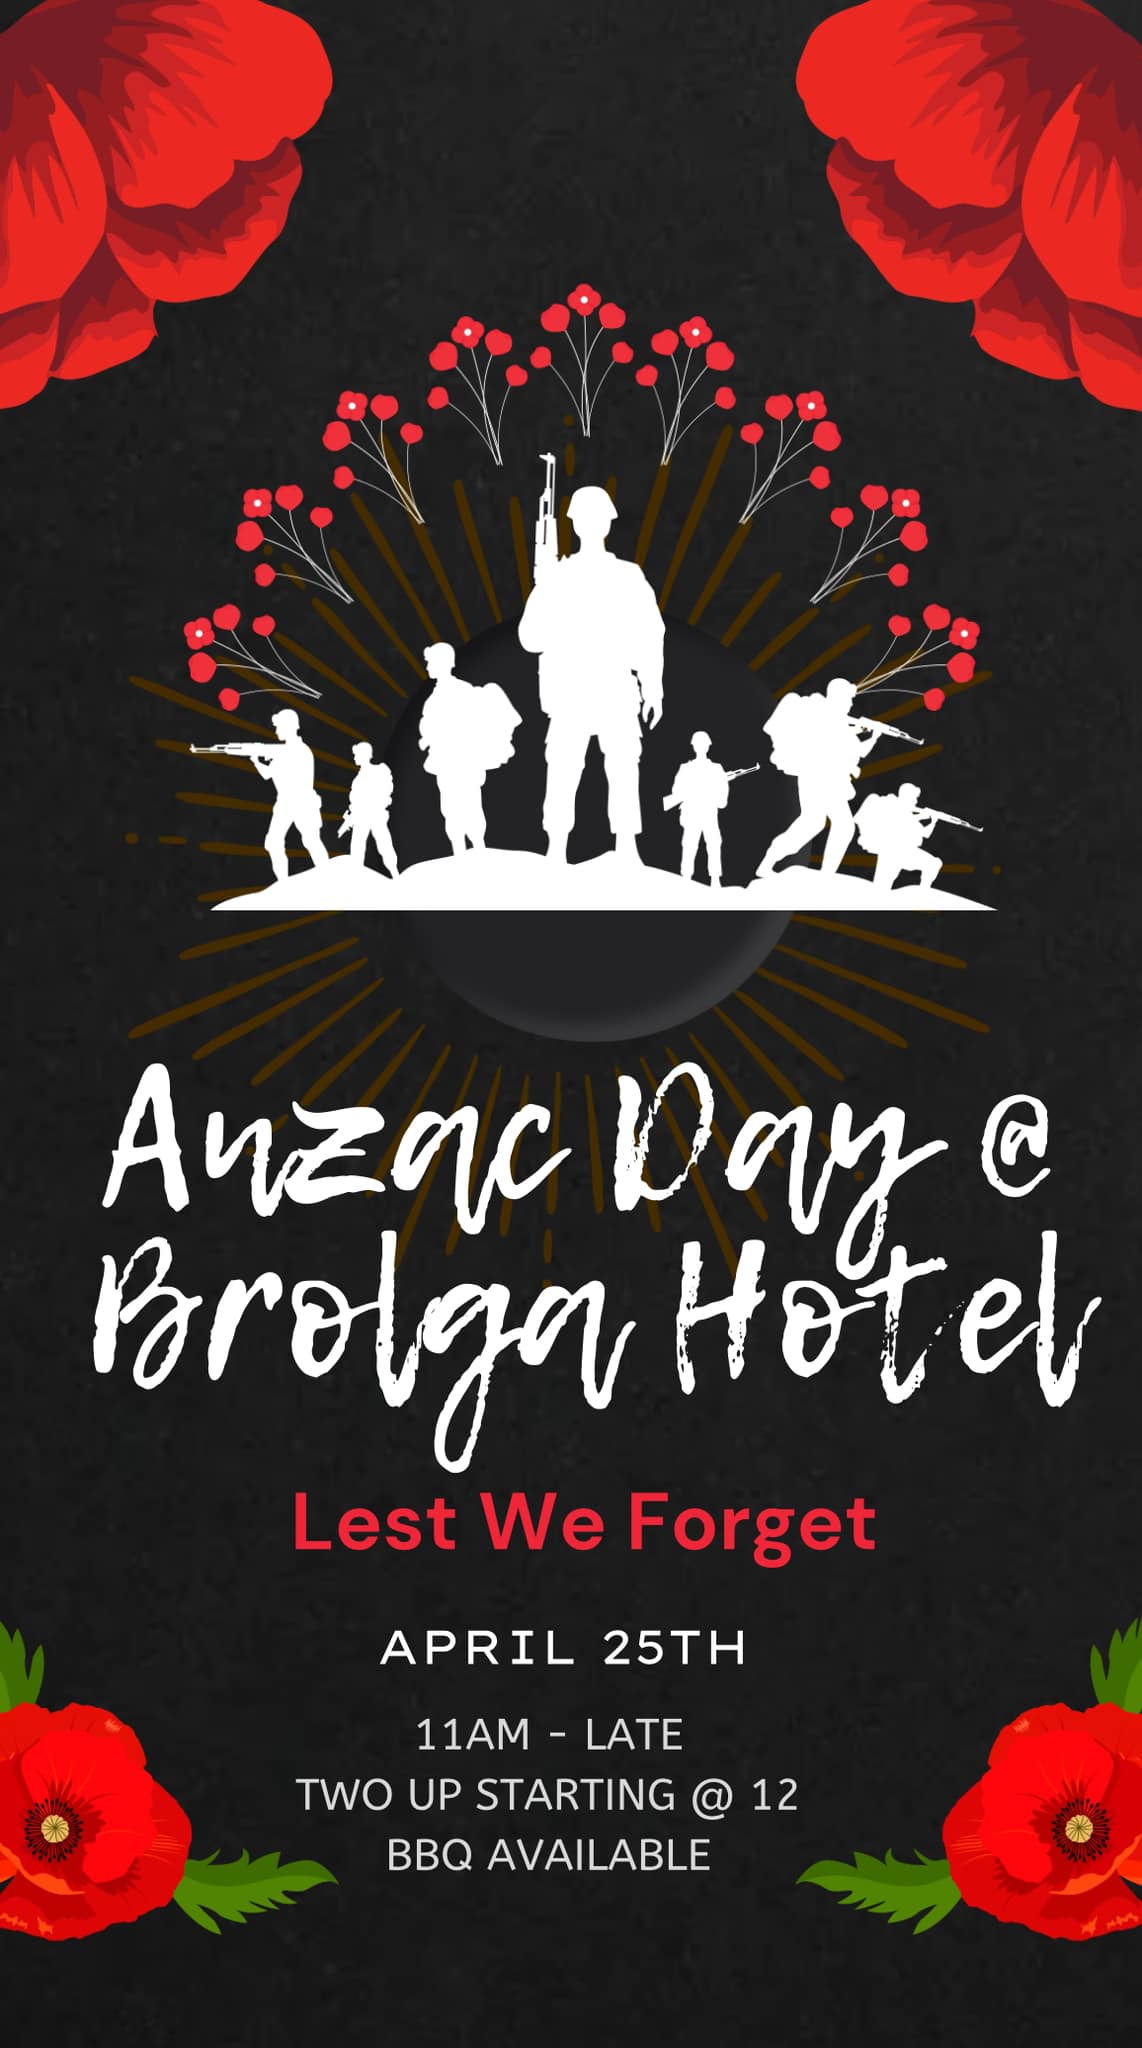 Brolga Hotel Coleambally - ANZAC Day Two Up